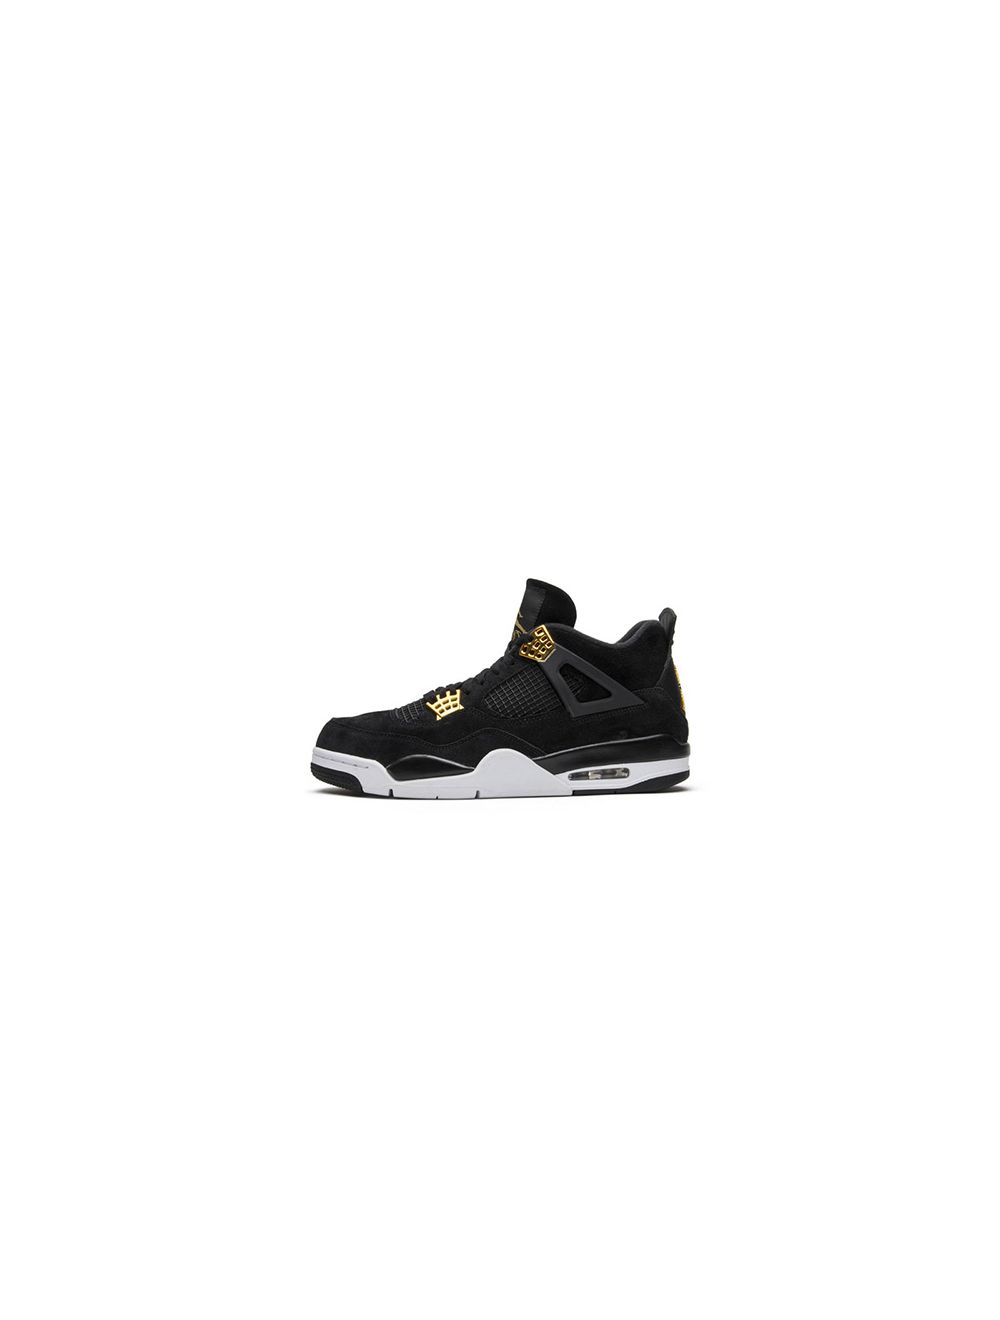 Royalty is on the way. The Nike Air Jordan 4 Retro Royalty is available  for preorder at kickbackzny.com.